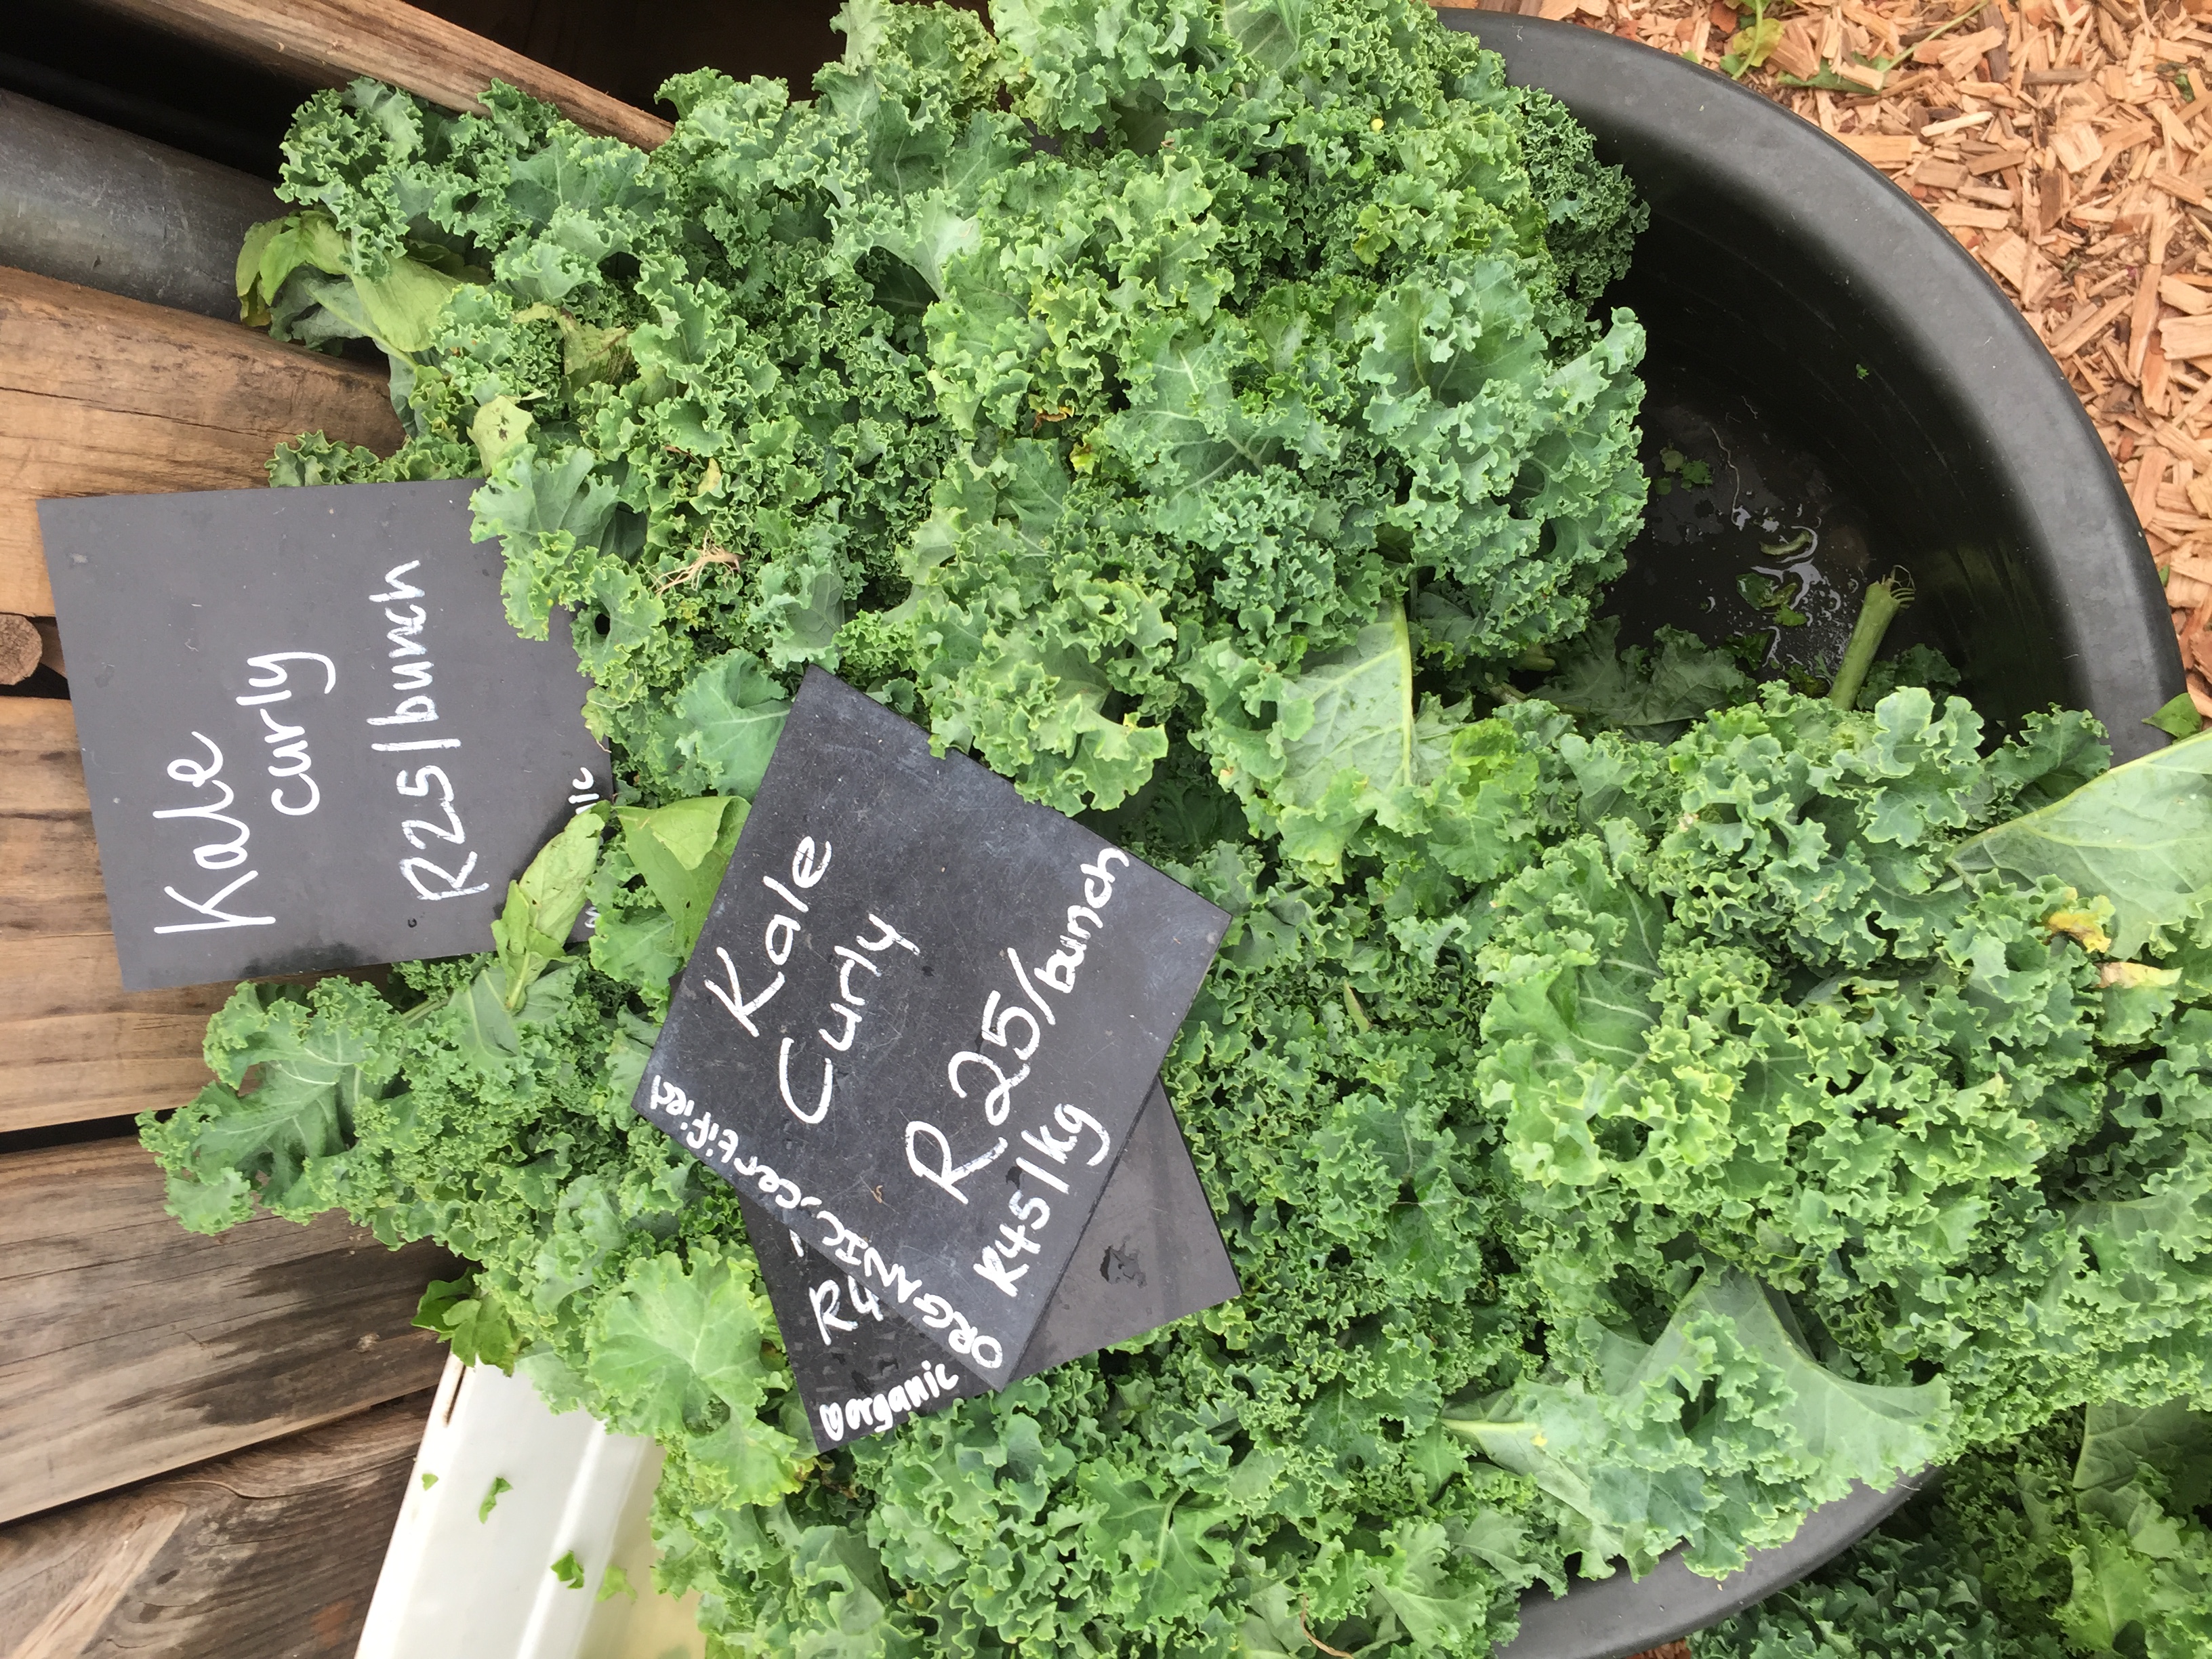 curly organic kale at the Granger Bay Market, Cape Town, South Africa - Copyright Great Health Naturally